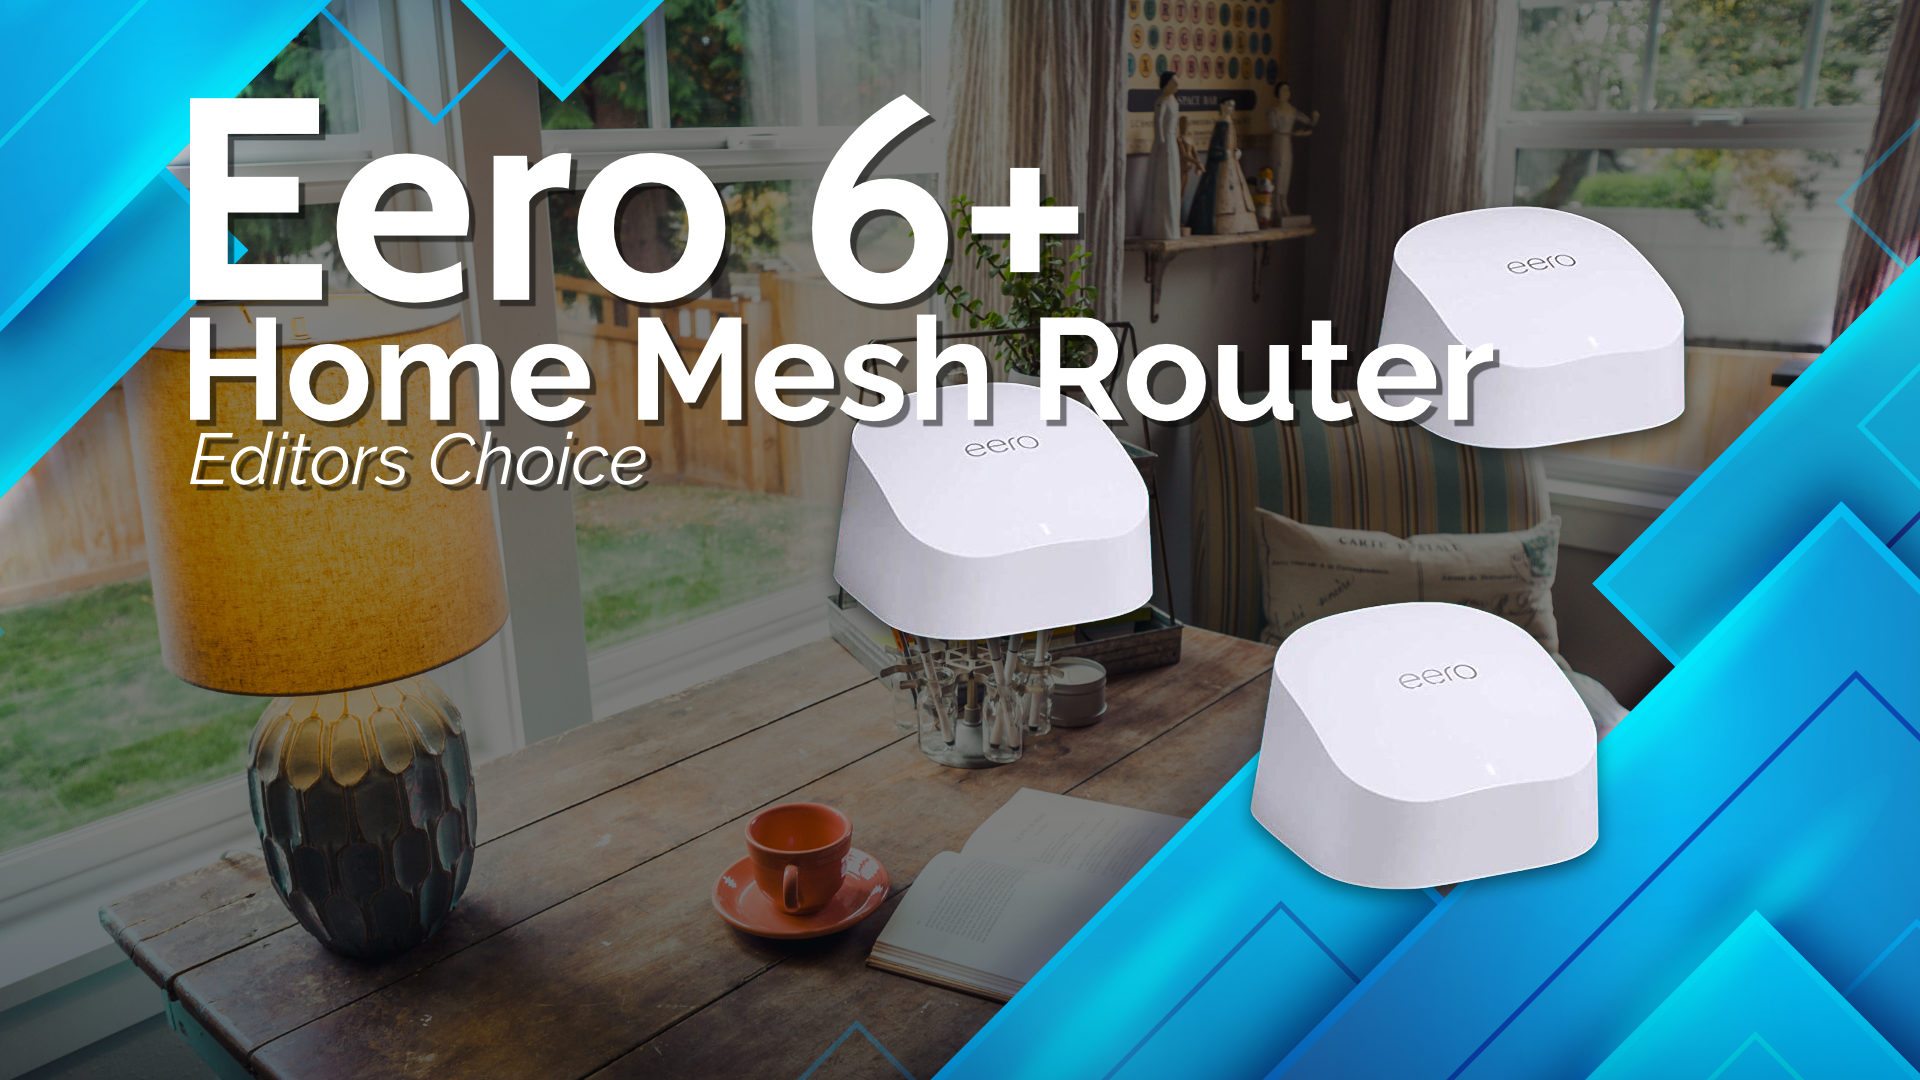 Eero 6 Plus (Eero 6+) Mesh Router Review: Made Solid, Reliable & Trusted